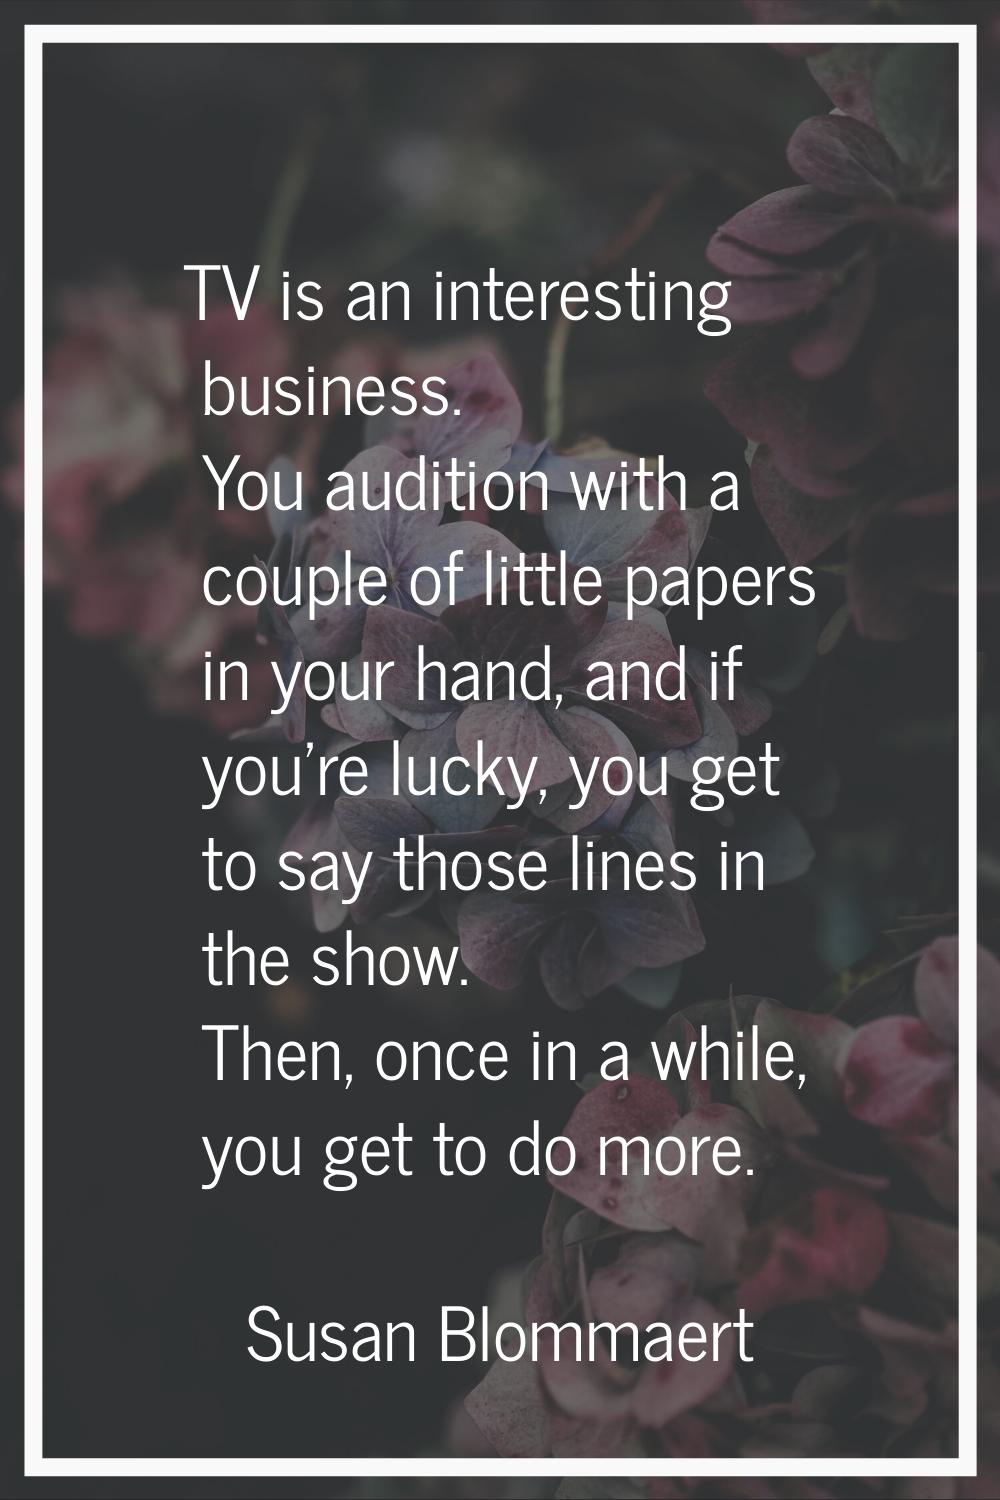 TV is an interesting business. You audition with a couple of little papers in your hand, and if you